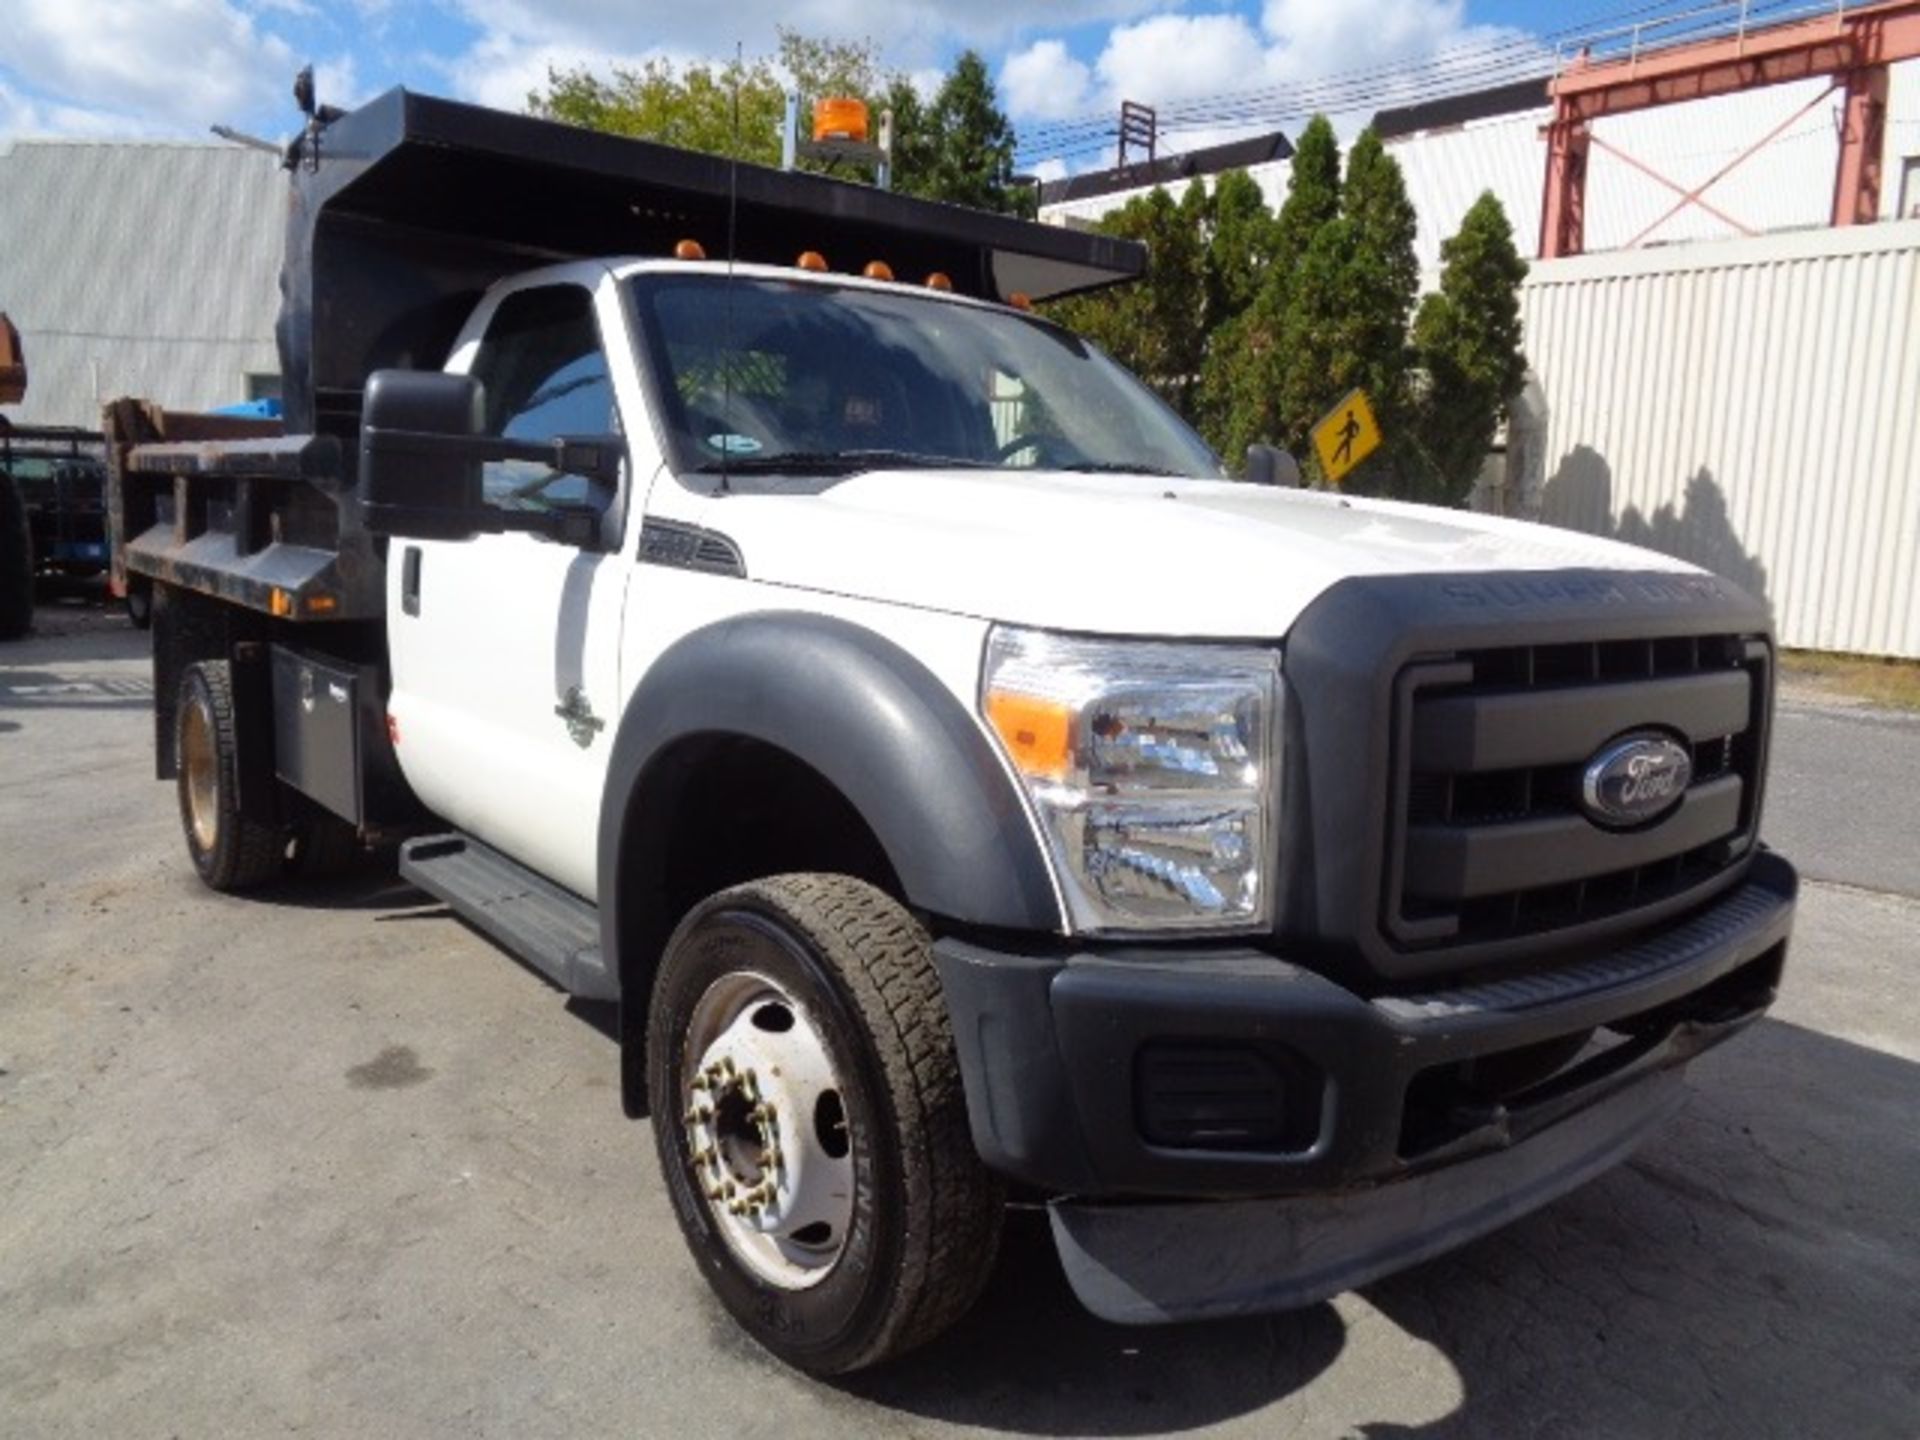 2012 Ford F550 Dump Truck - Image 5 of 19